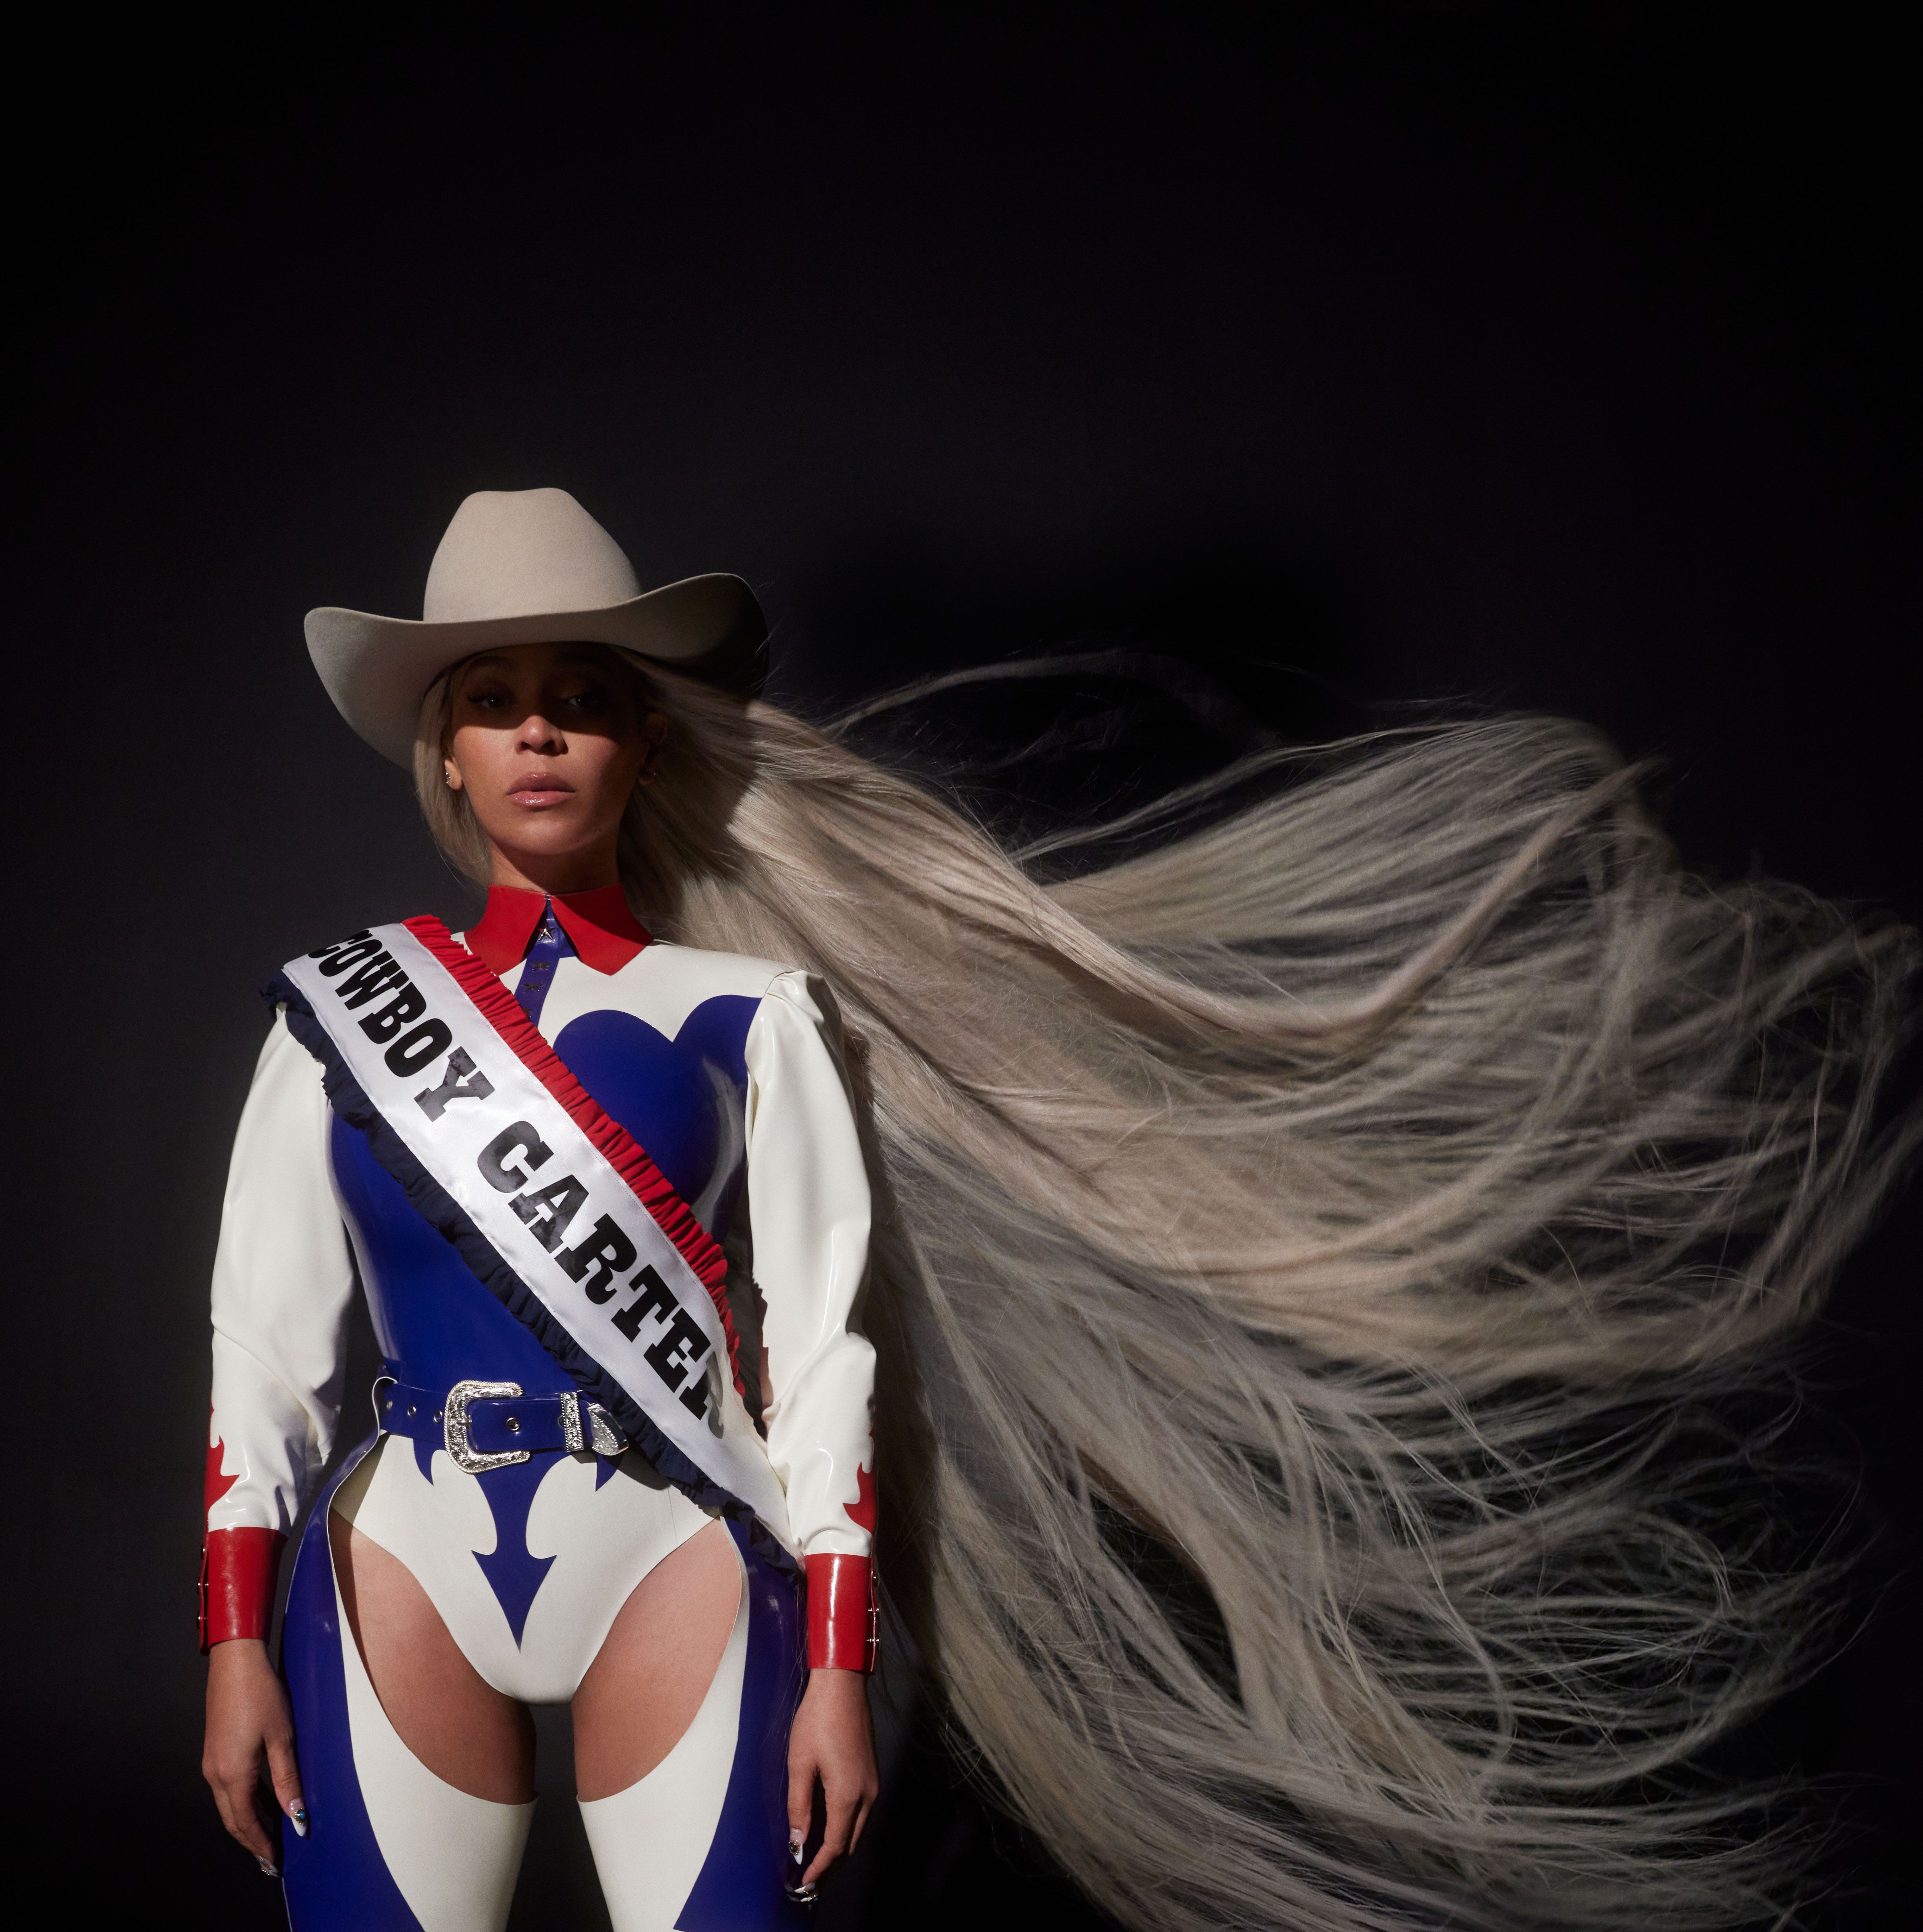 The megastar is overcoming rejection—on horseback, no less—and inviting Black women to own their multidimensional identities right alongside her. 